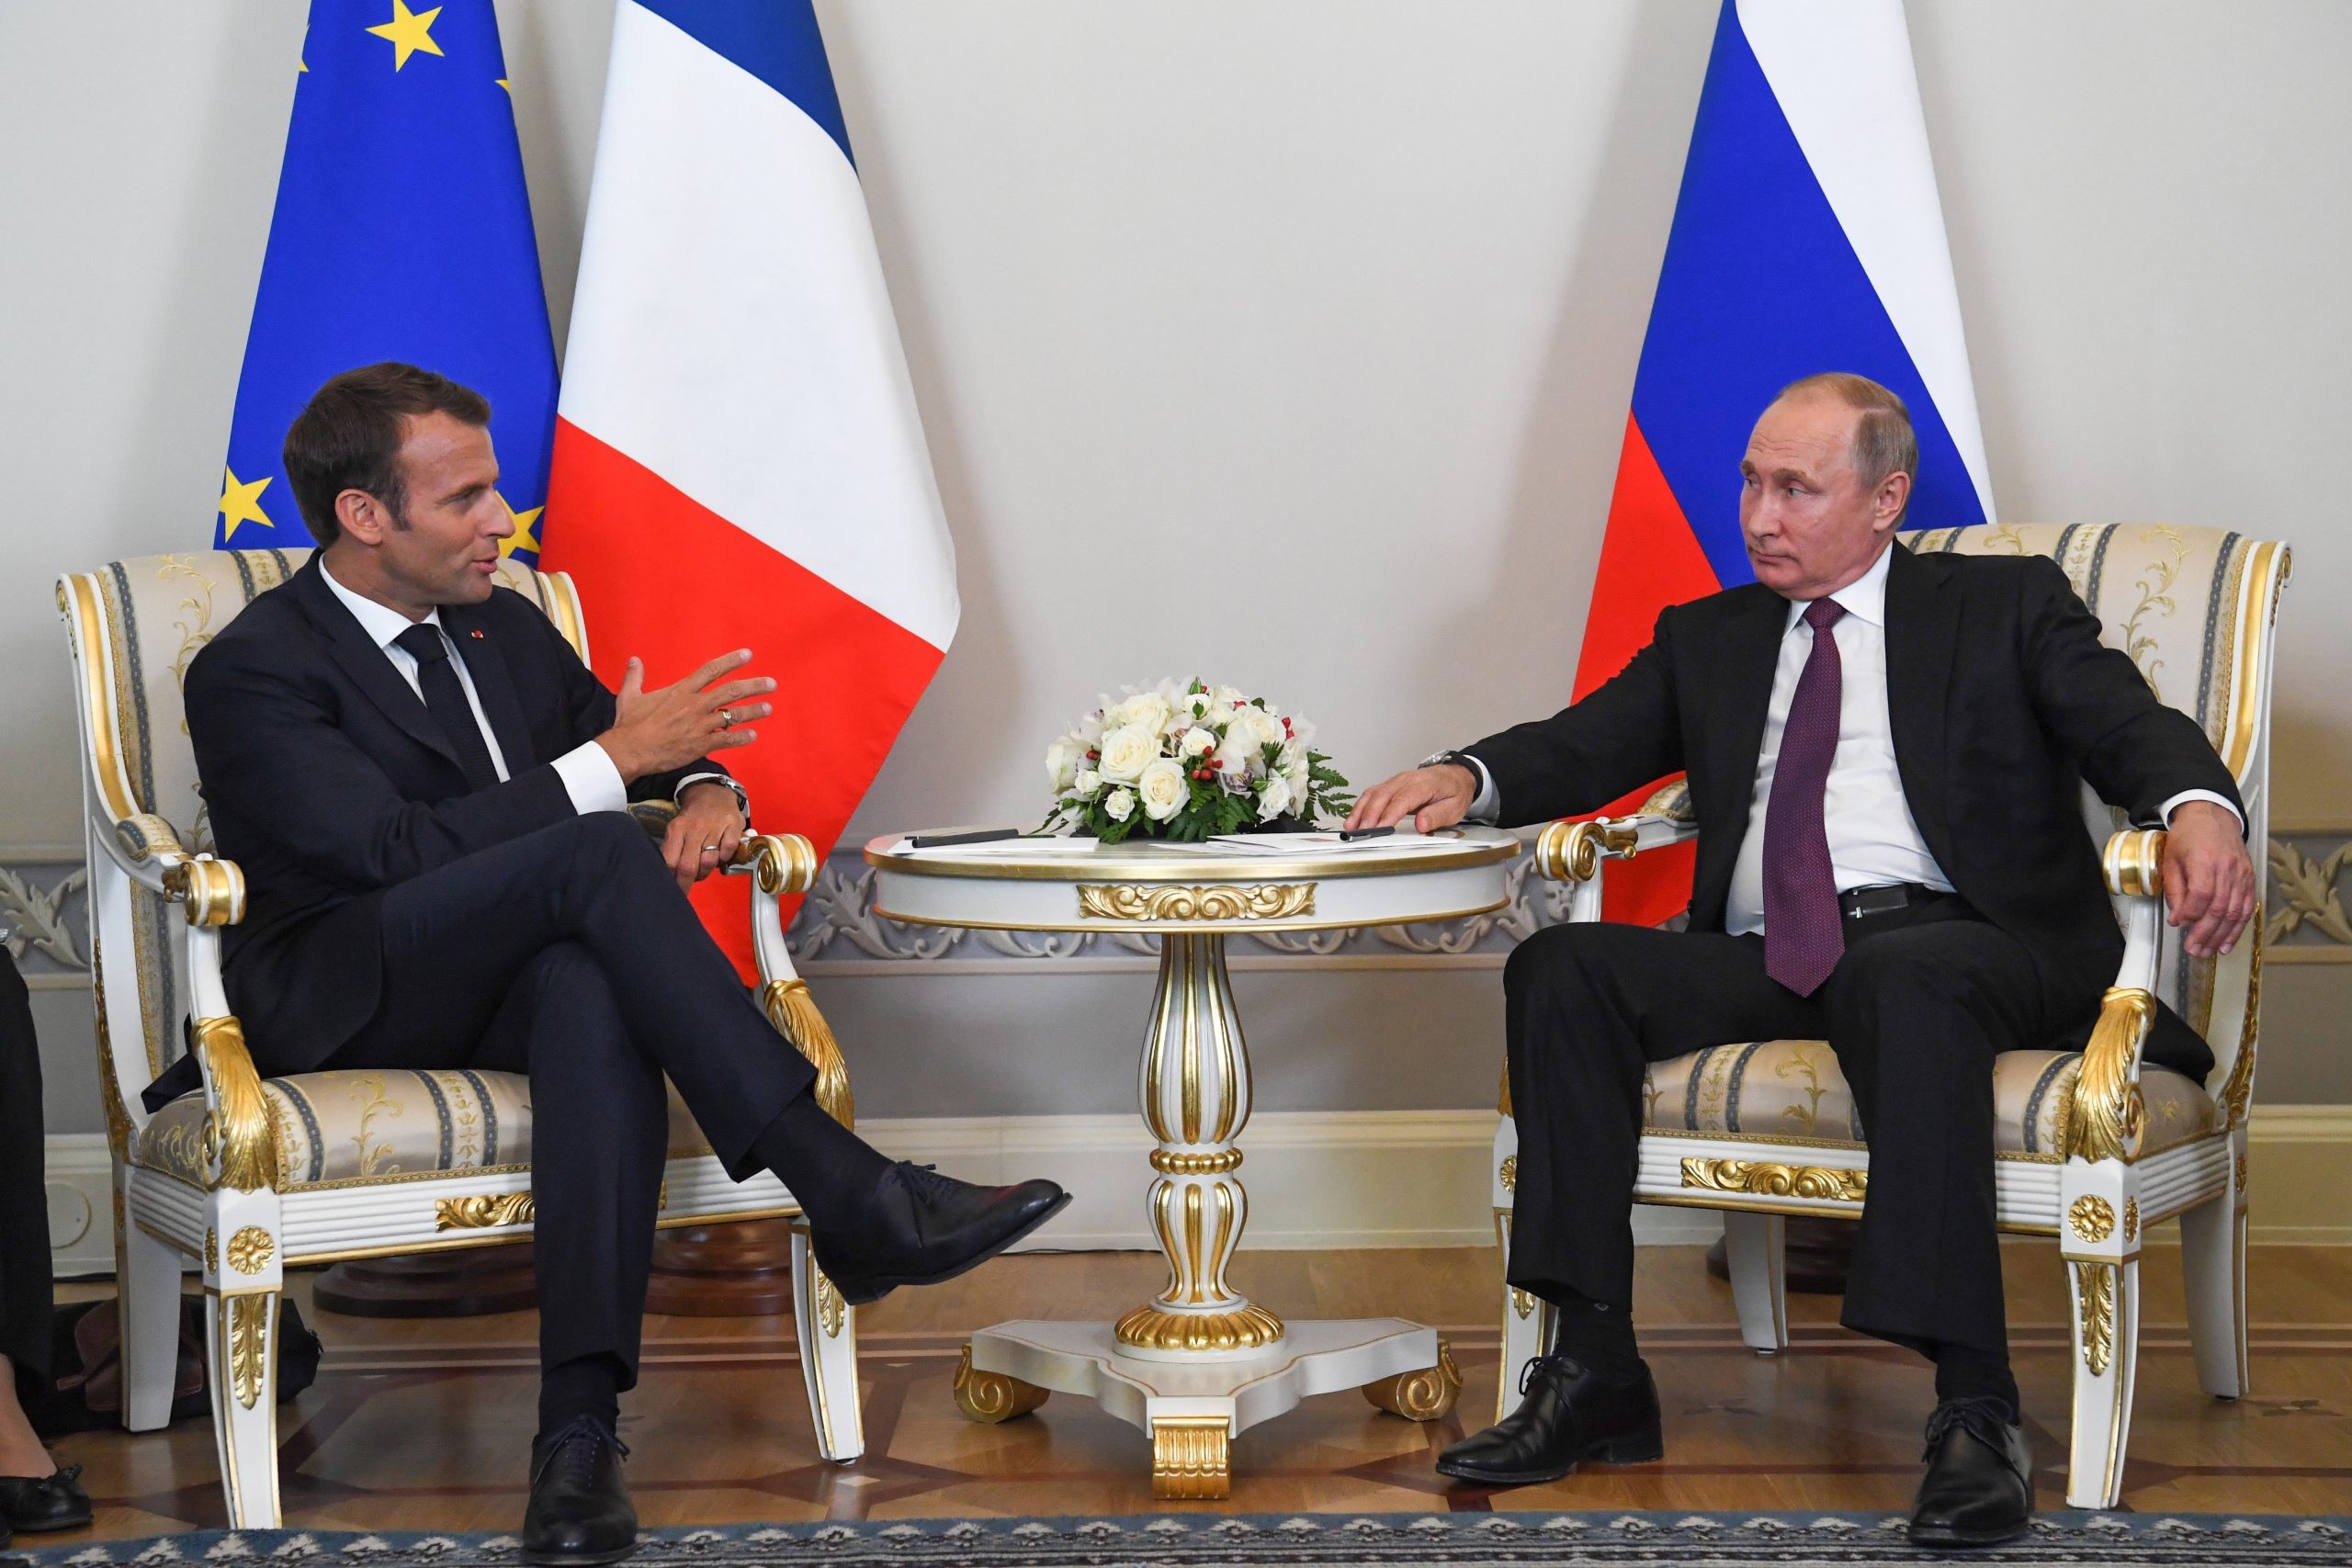 The Russian-French conflict is becoming more and more dangerous